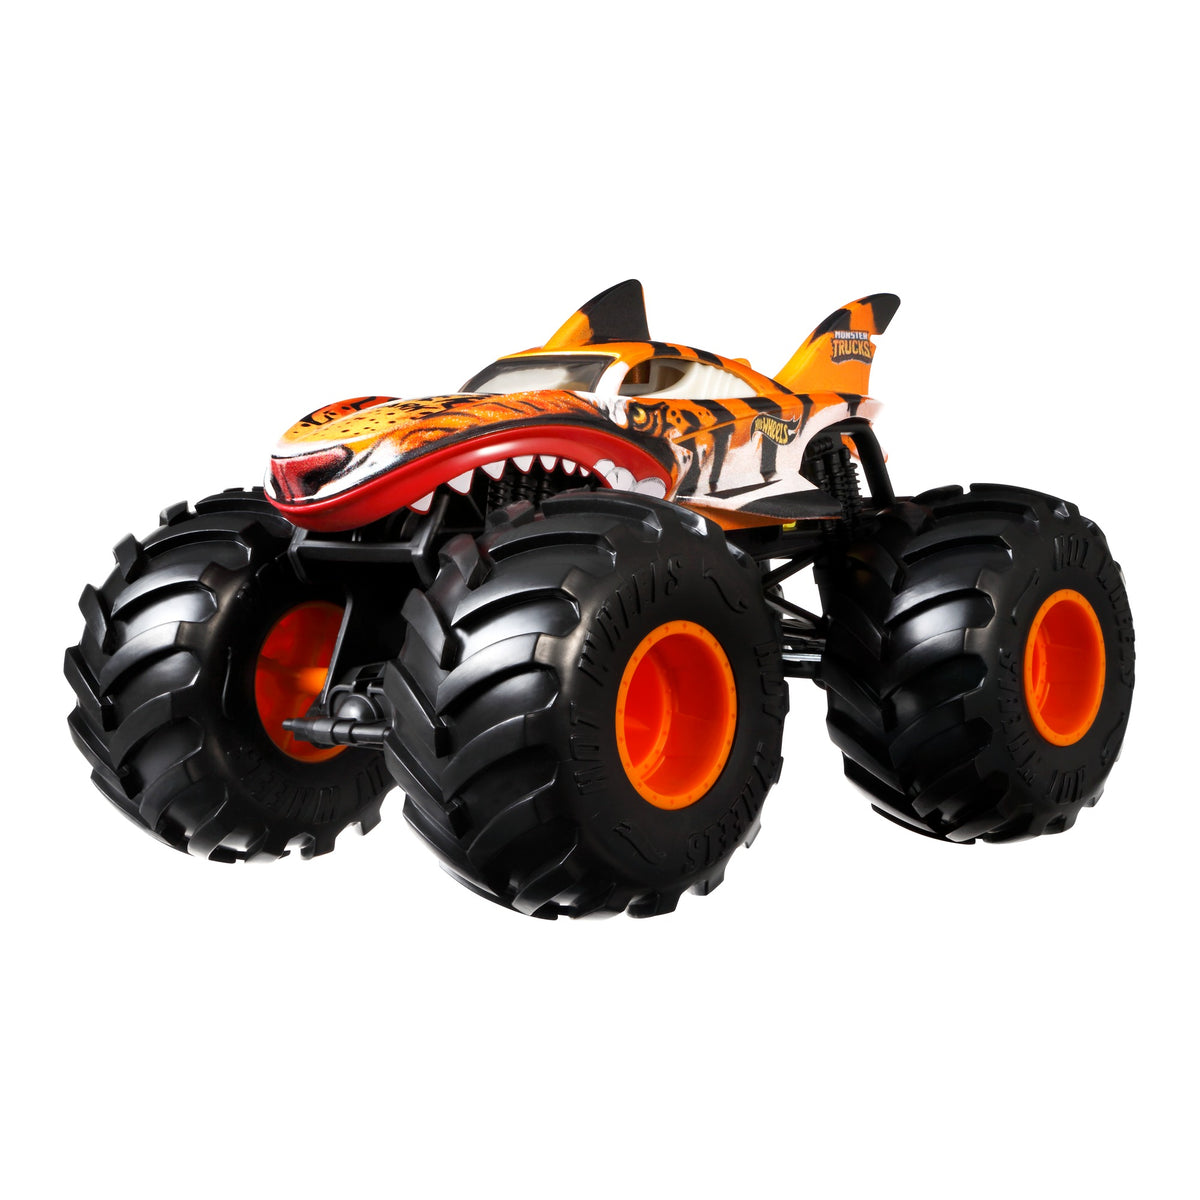 Hot Wheels 1:24 Scale Oversized Monster Truck Tiger Shark Die-Cast Toy Truck with Giant Wheels and Cool Designs